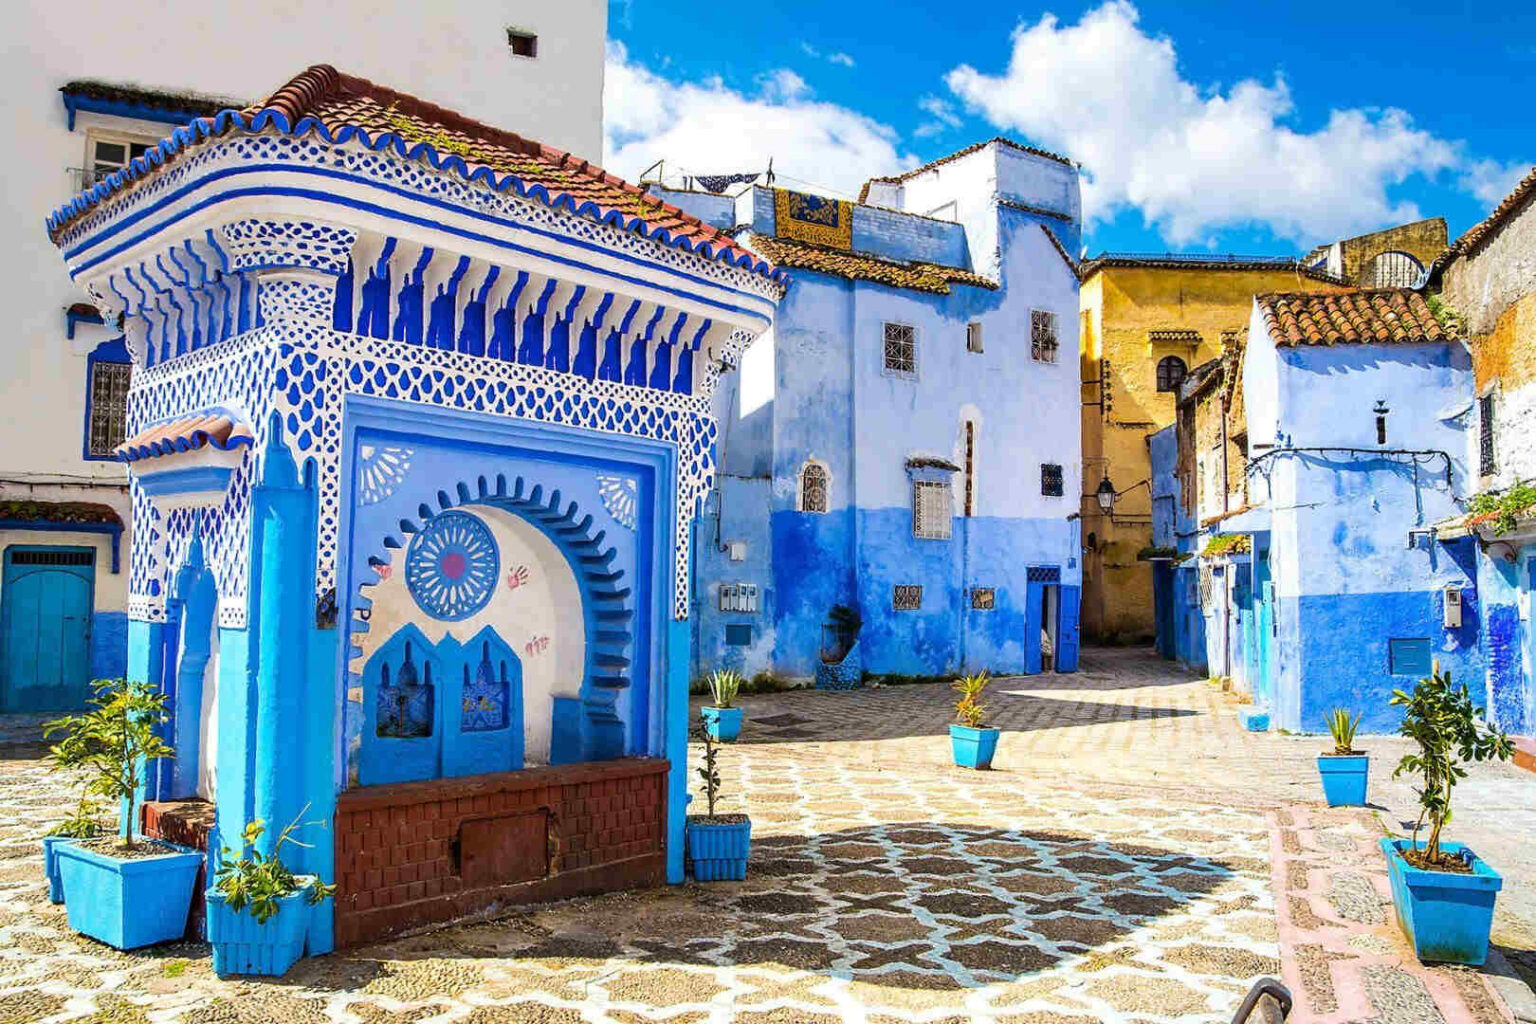 If you want to see the world, why not visit Morocco? We've put together the perfect travel itinerary for your next big adventure. Check it out here.